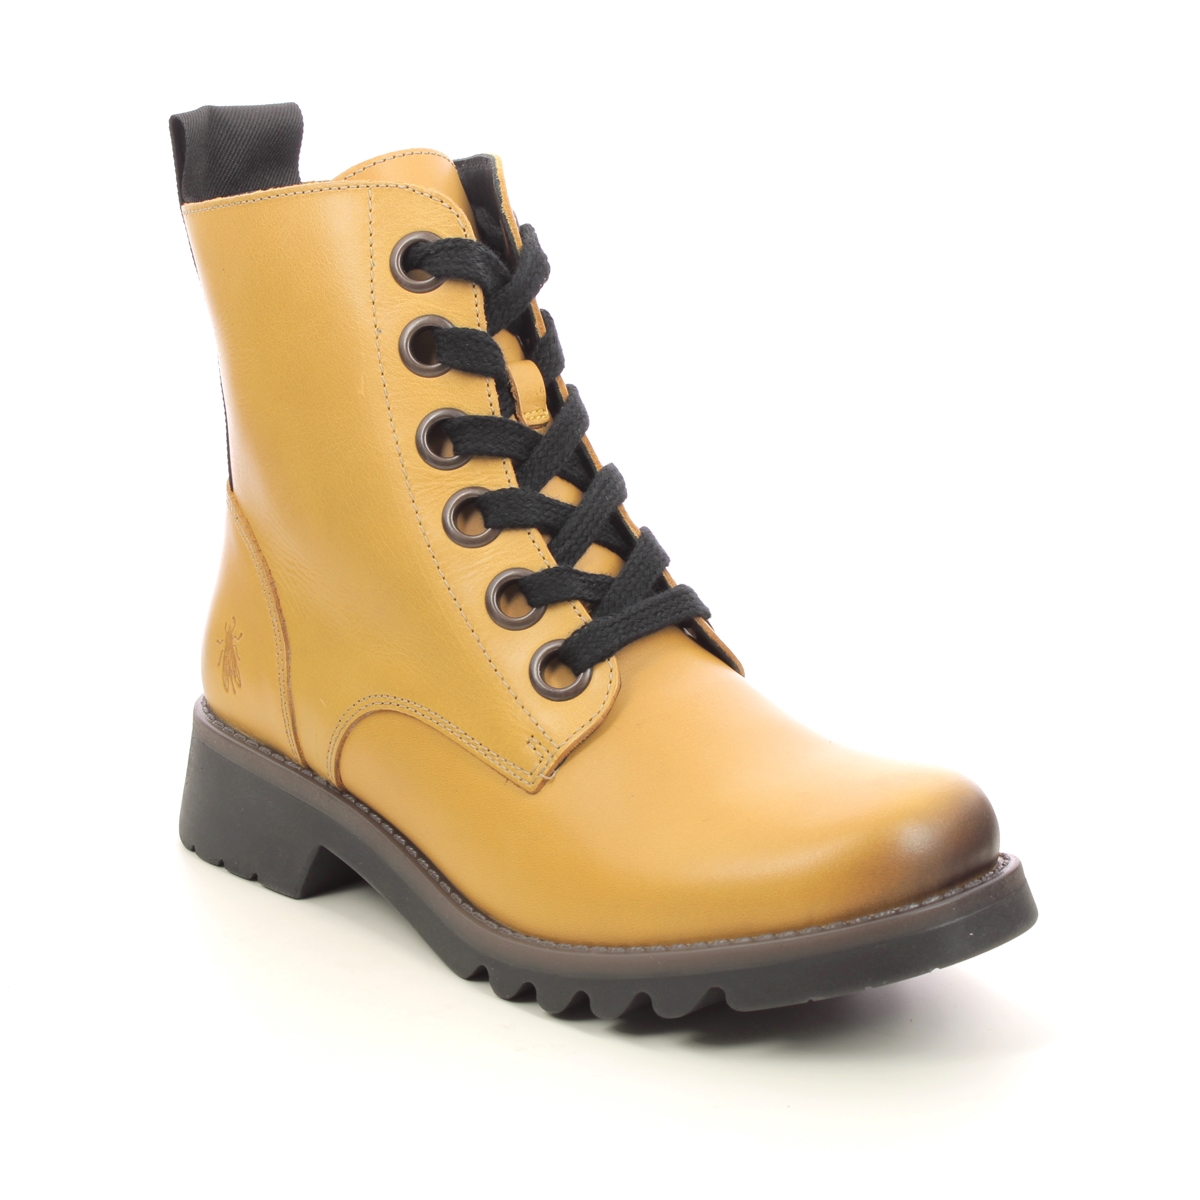 Fly London Ragi  Ronin Yellow Womens Lace Up Boots P144539-030 in a Plain Leather in Size 37